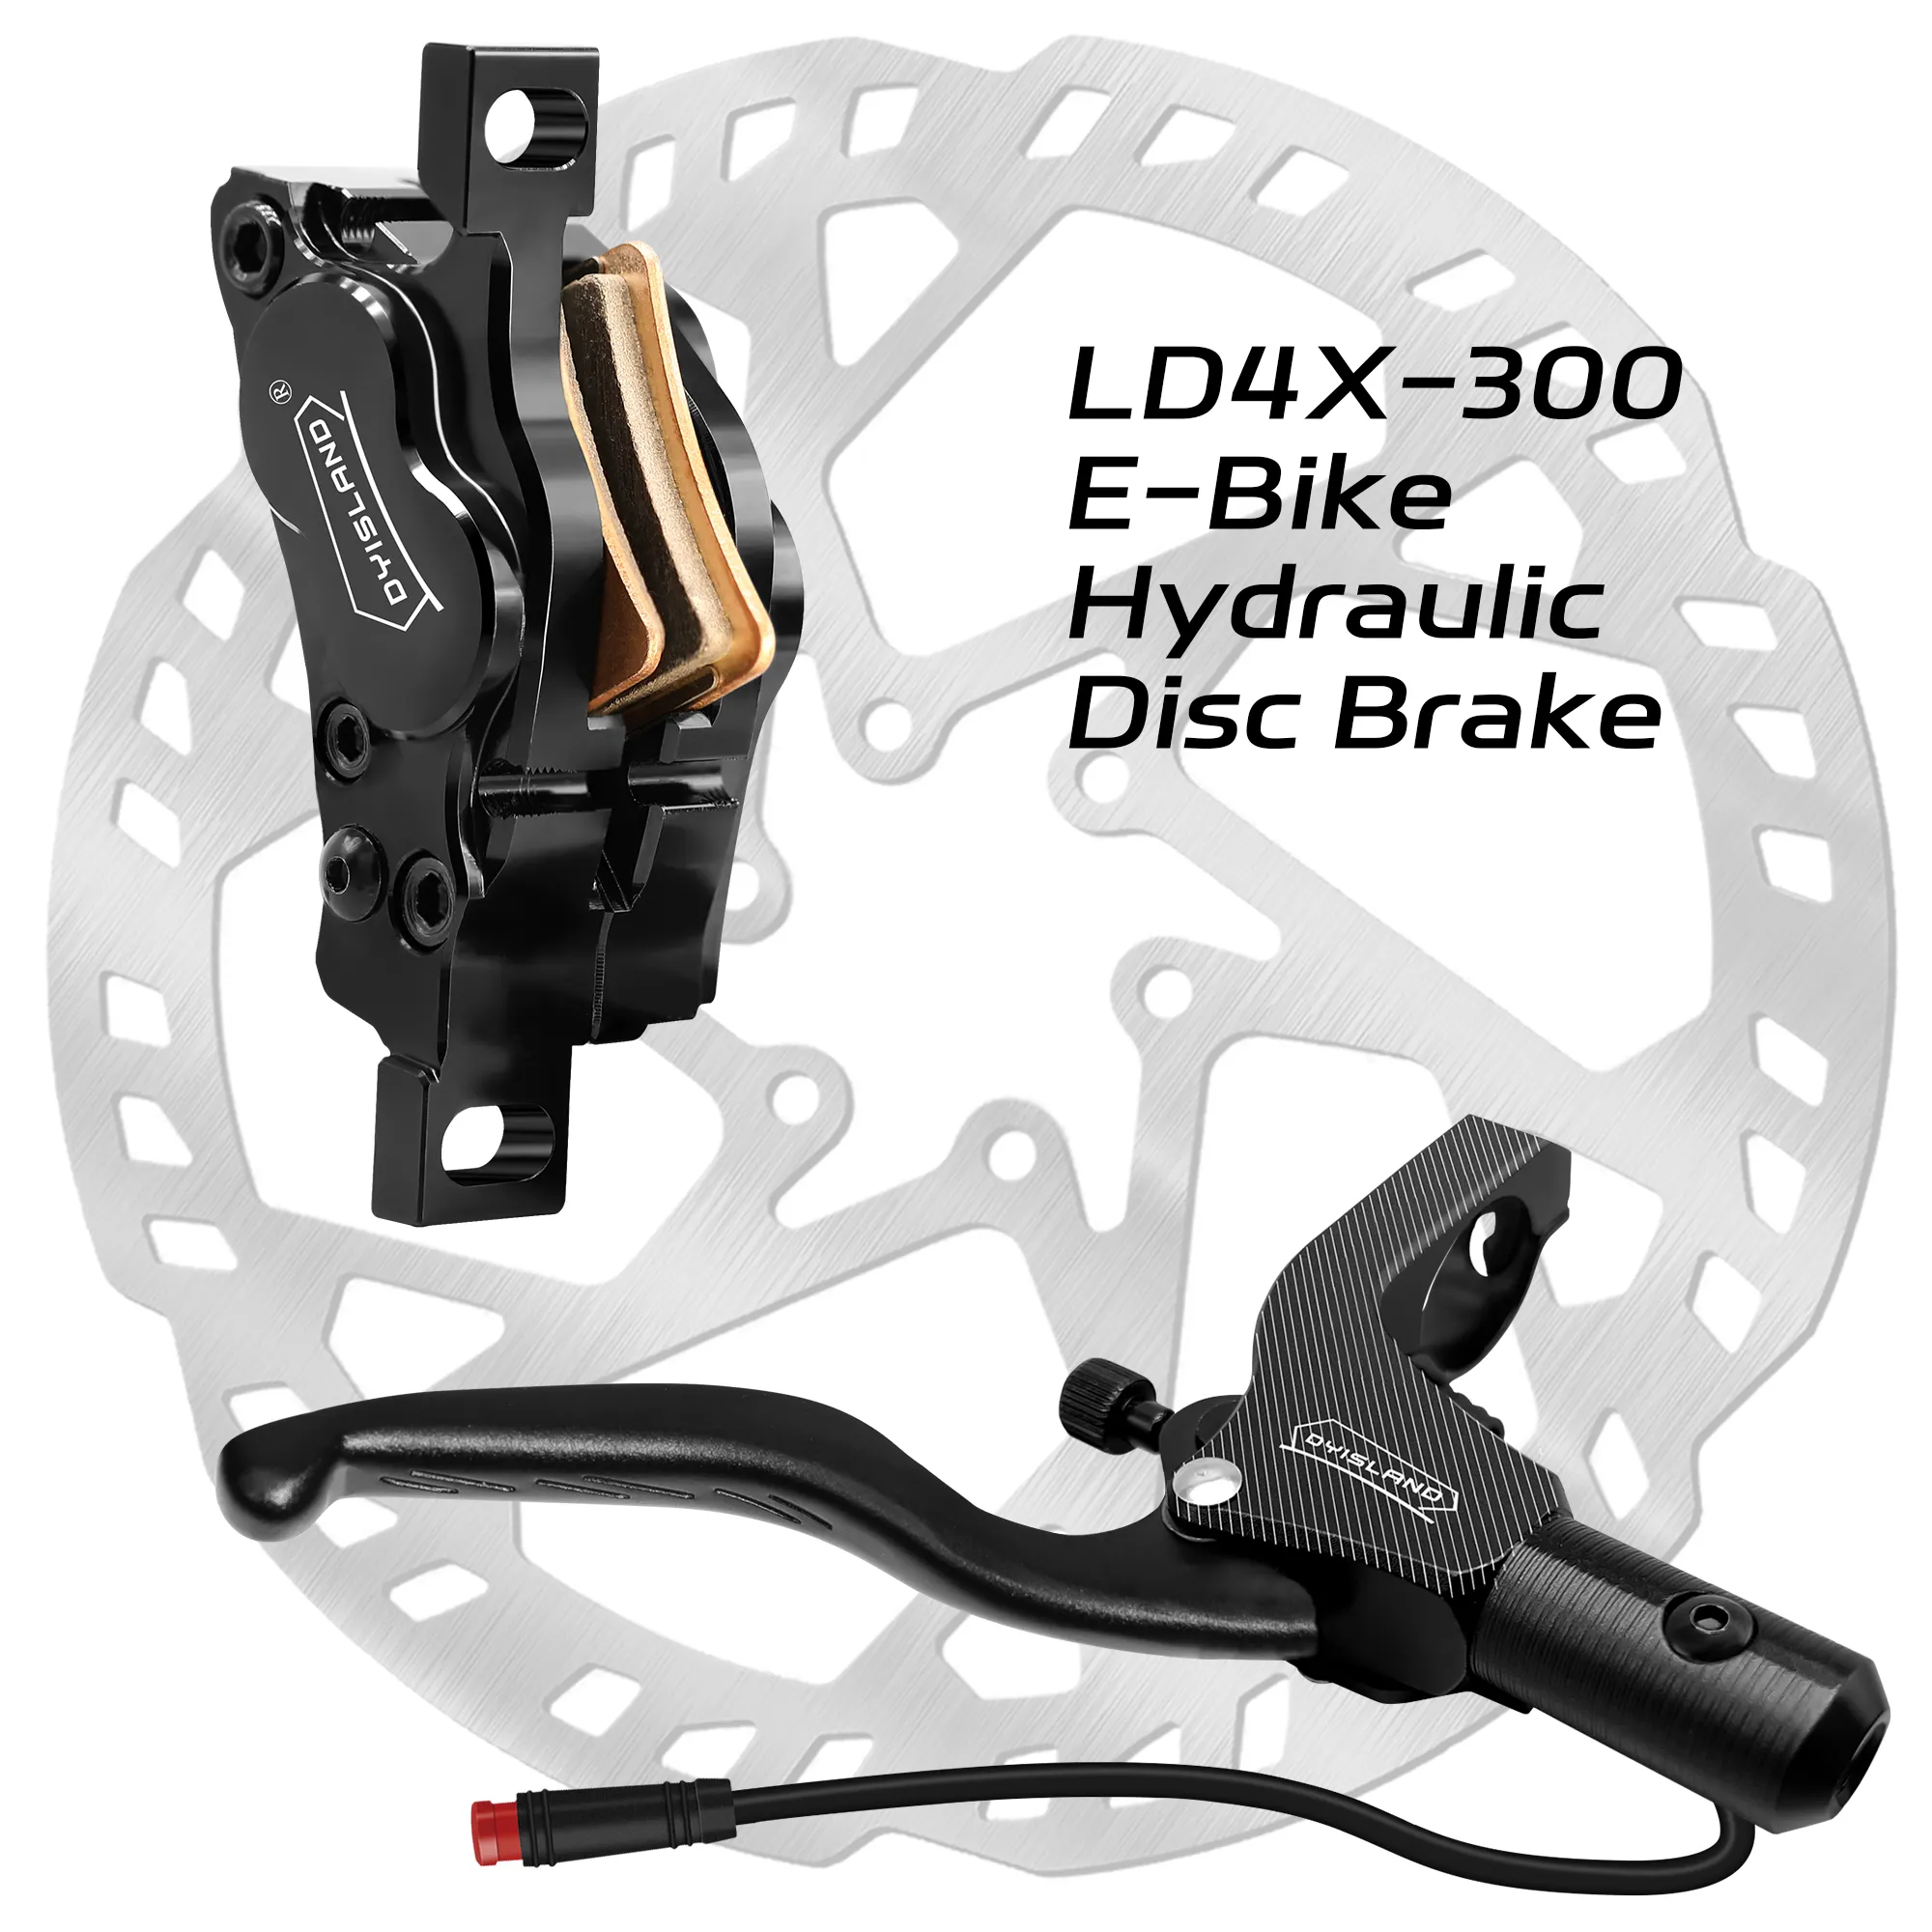 DYISLAND New Upgraded LD4X-300 Electric Bicycle Four piston 2-pin Power Loss Induction Control System Hydraulic Disc Brake Kit